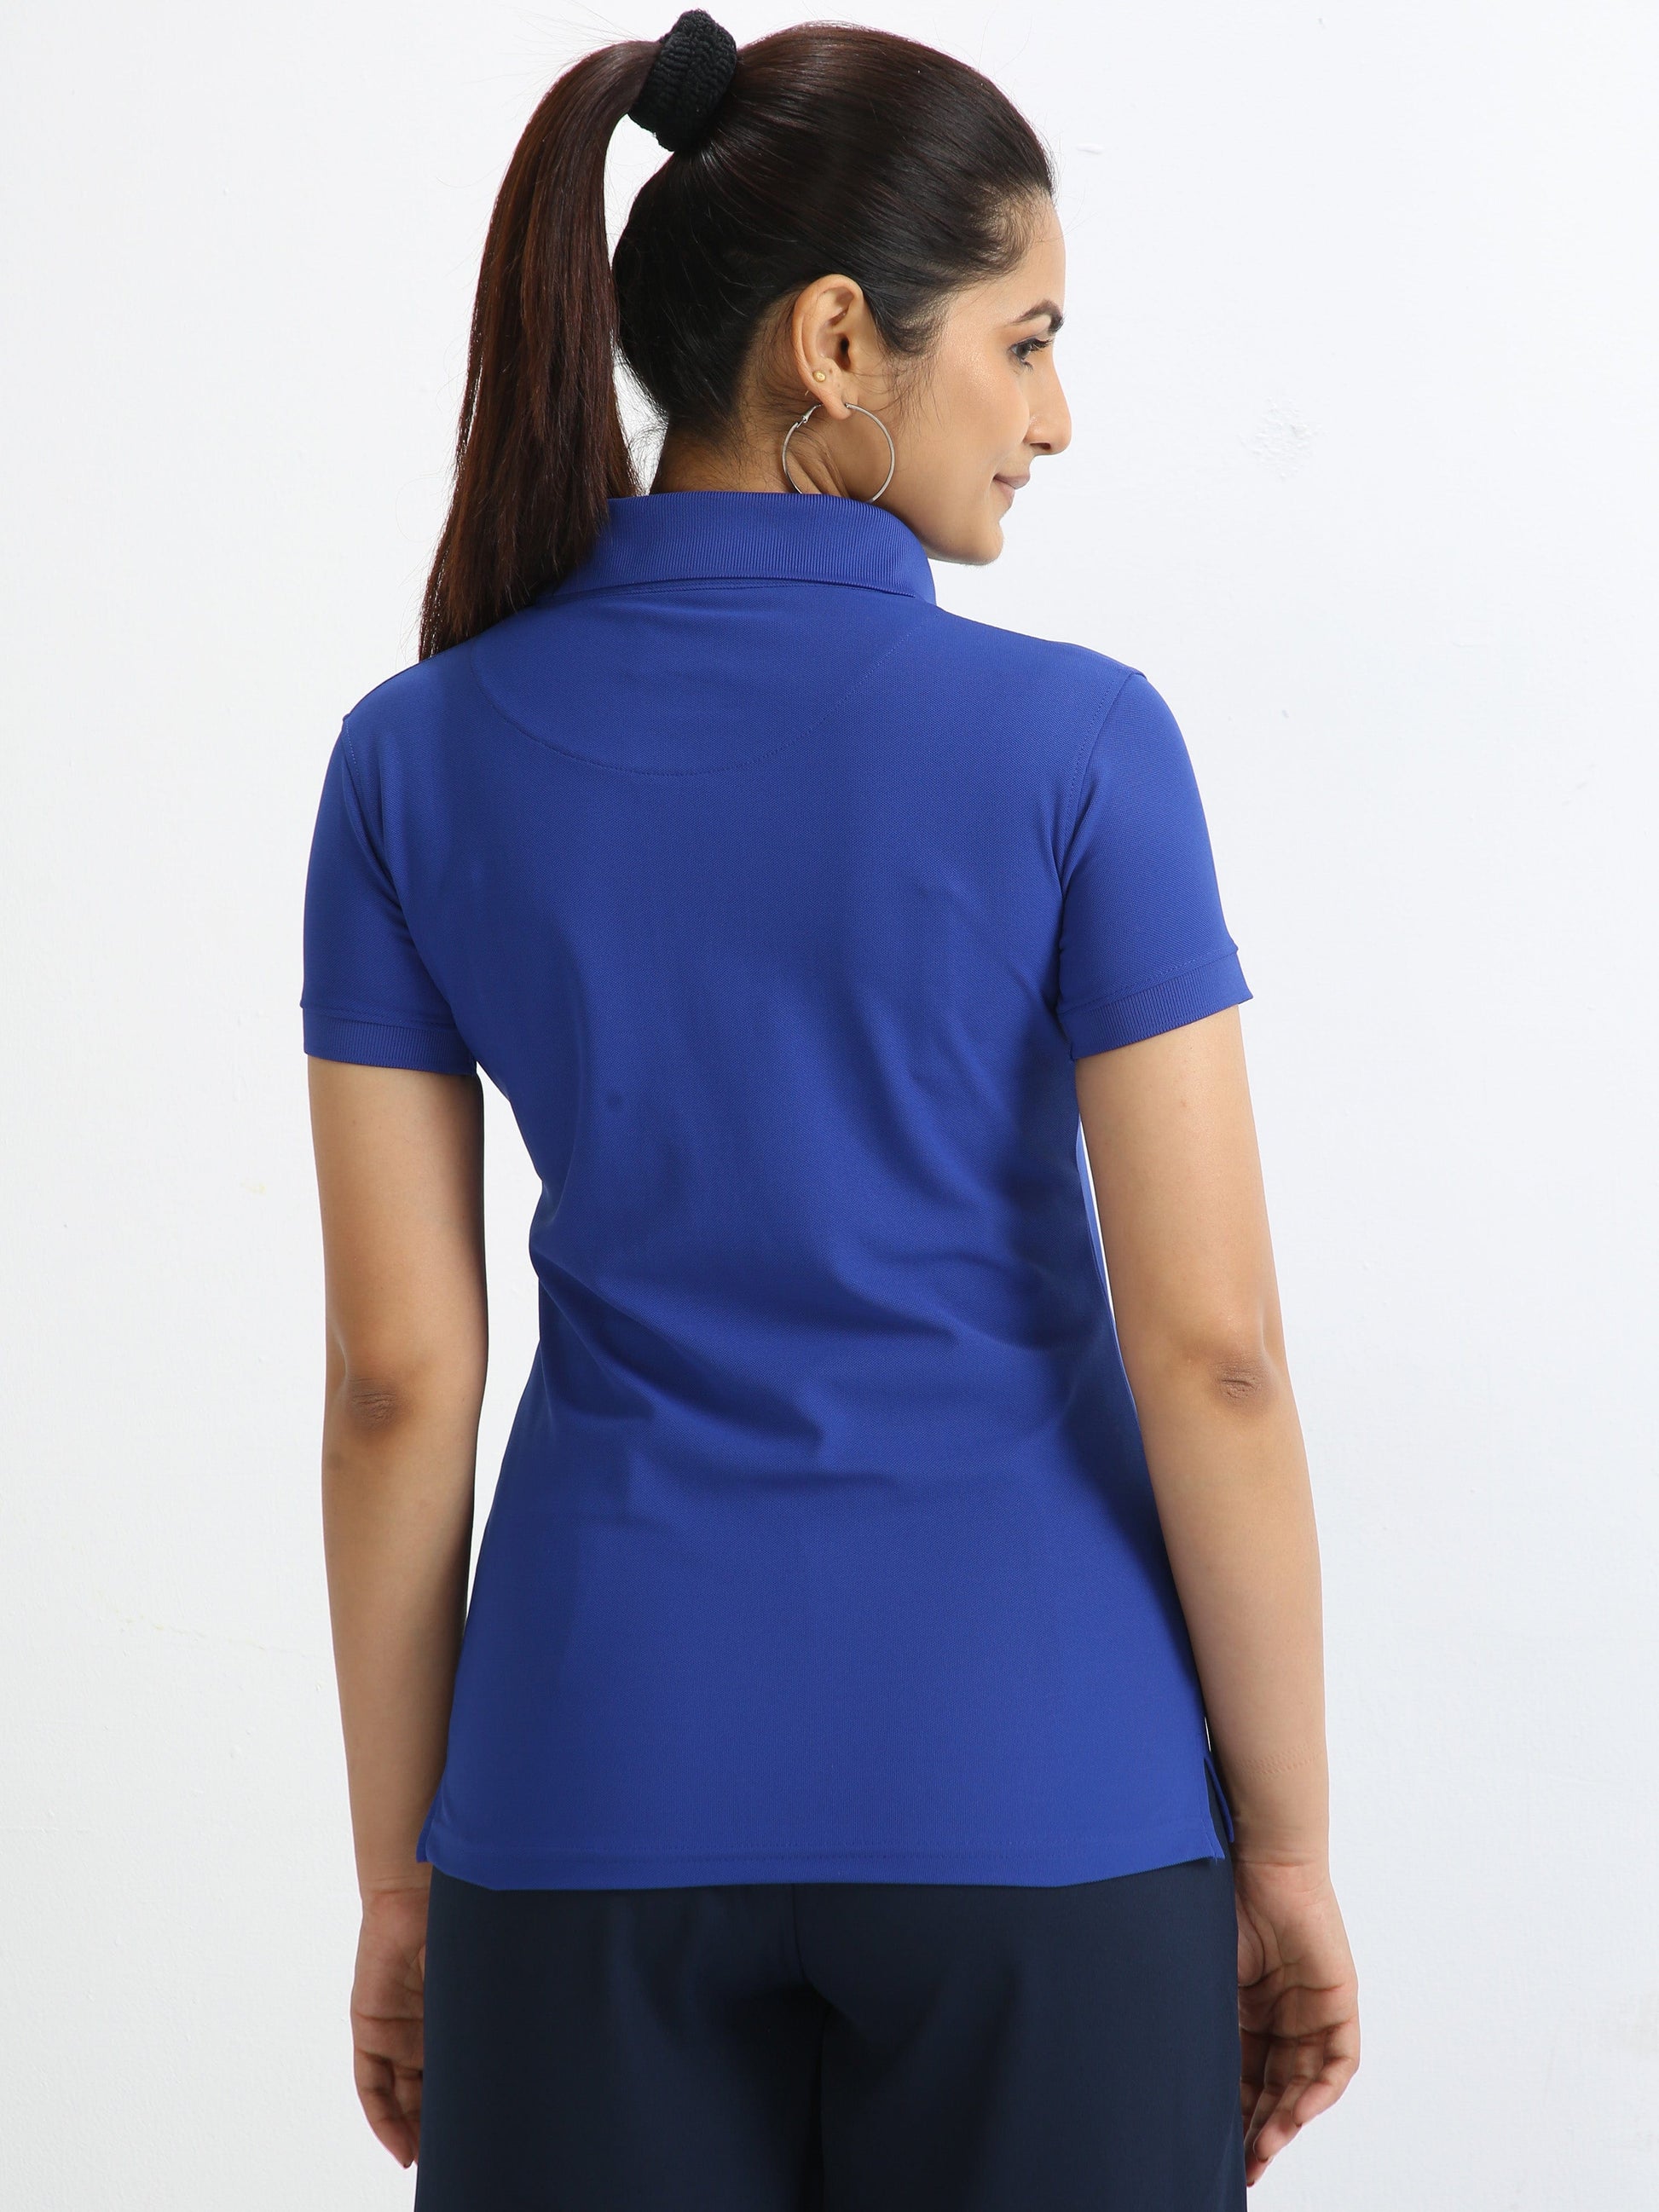 Imperial Blue Women's Polo T-shirt